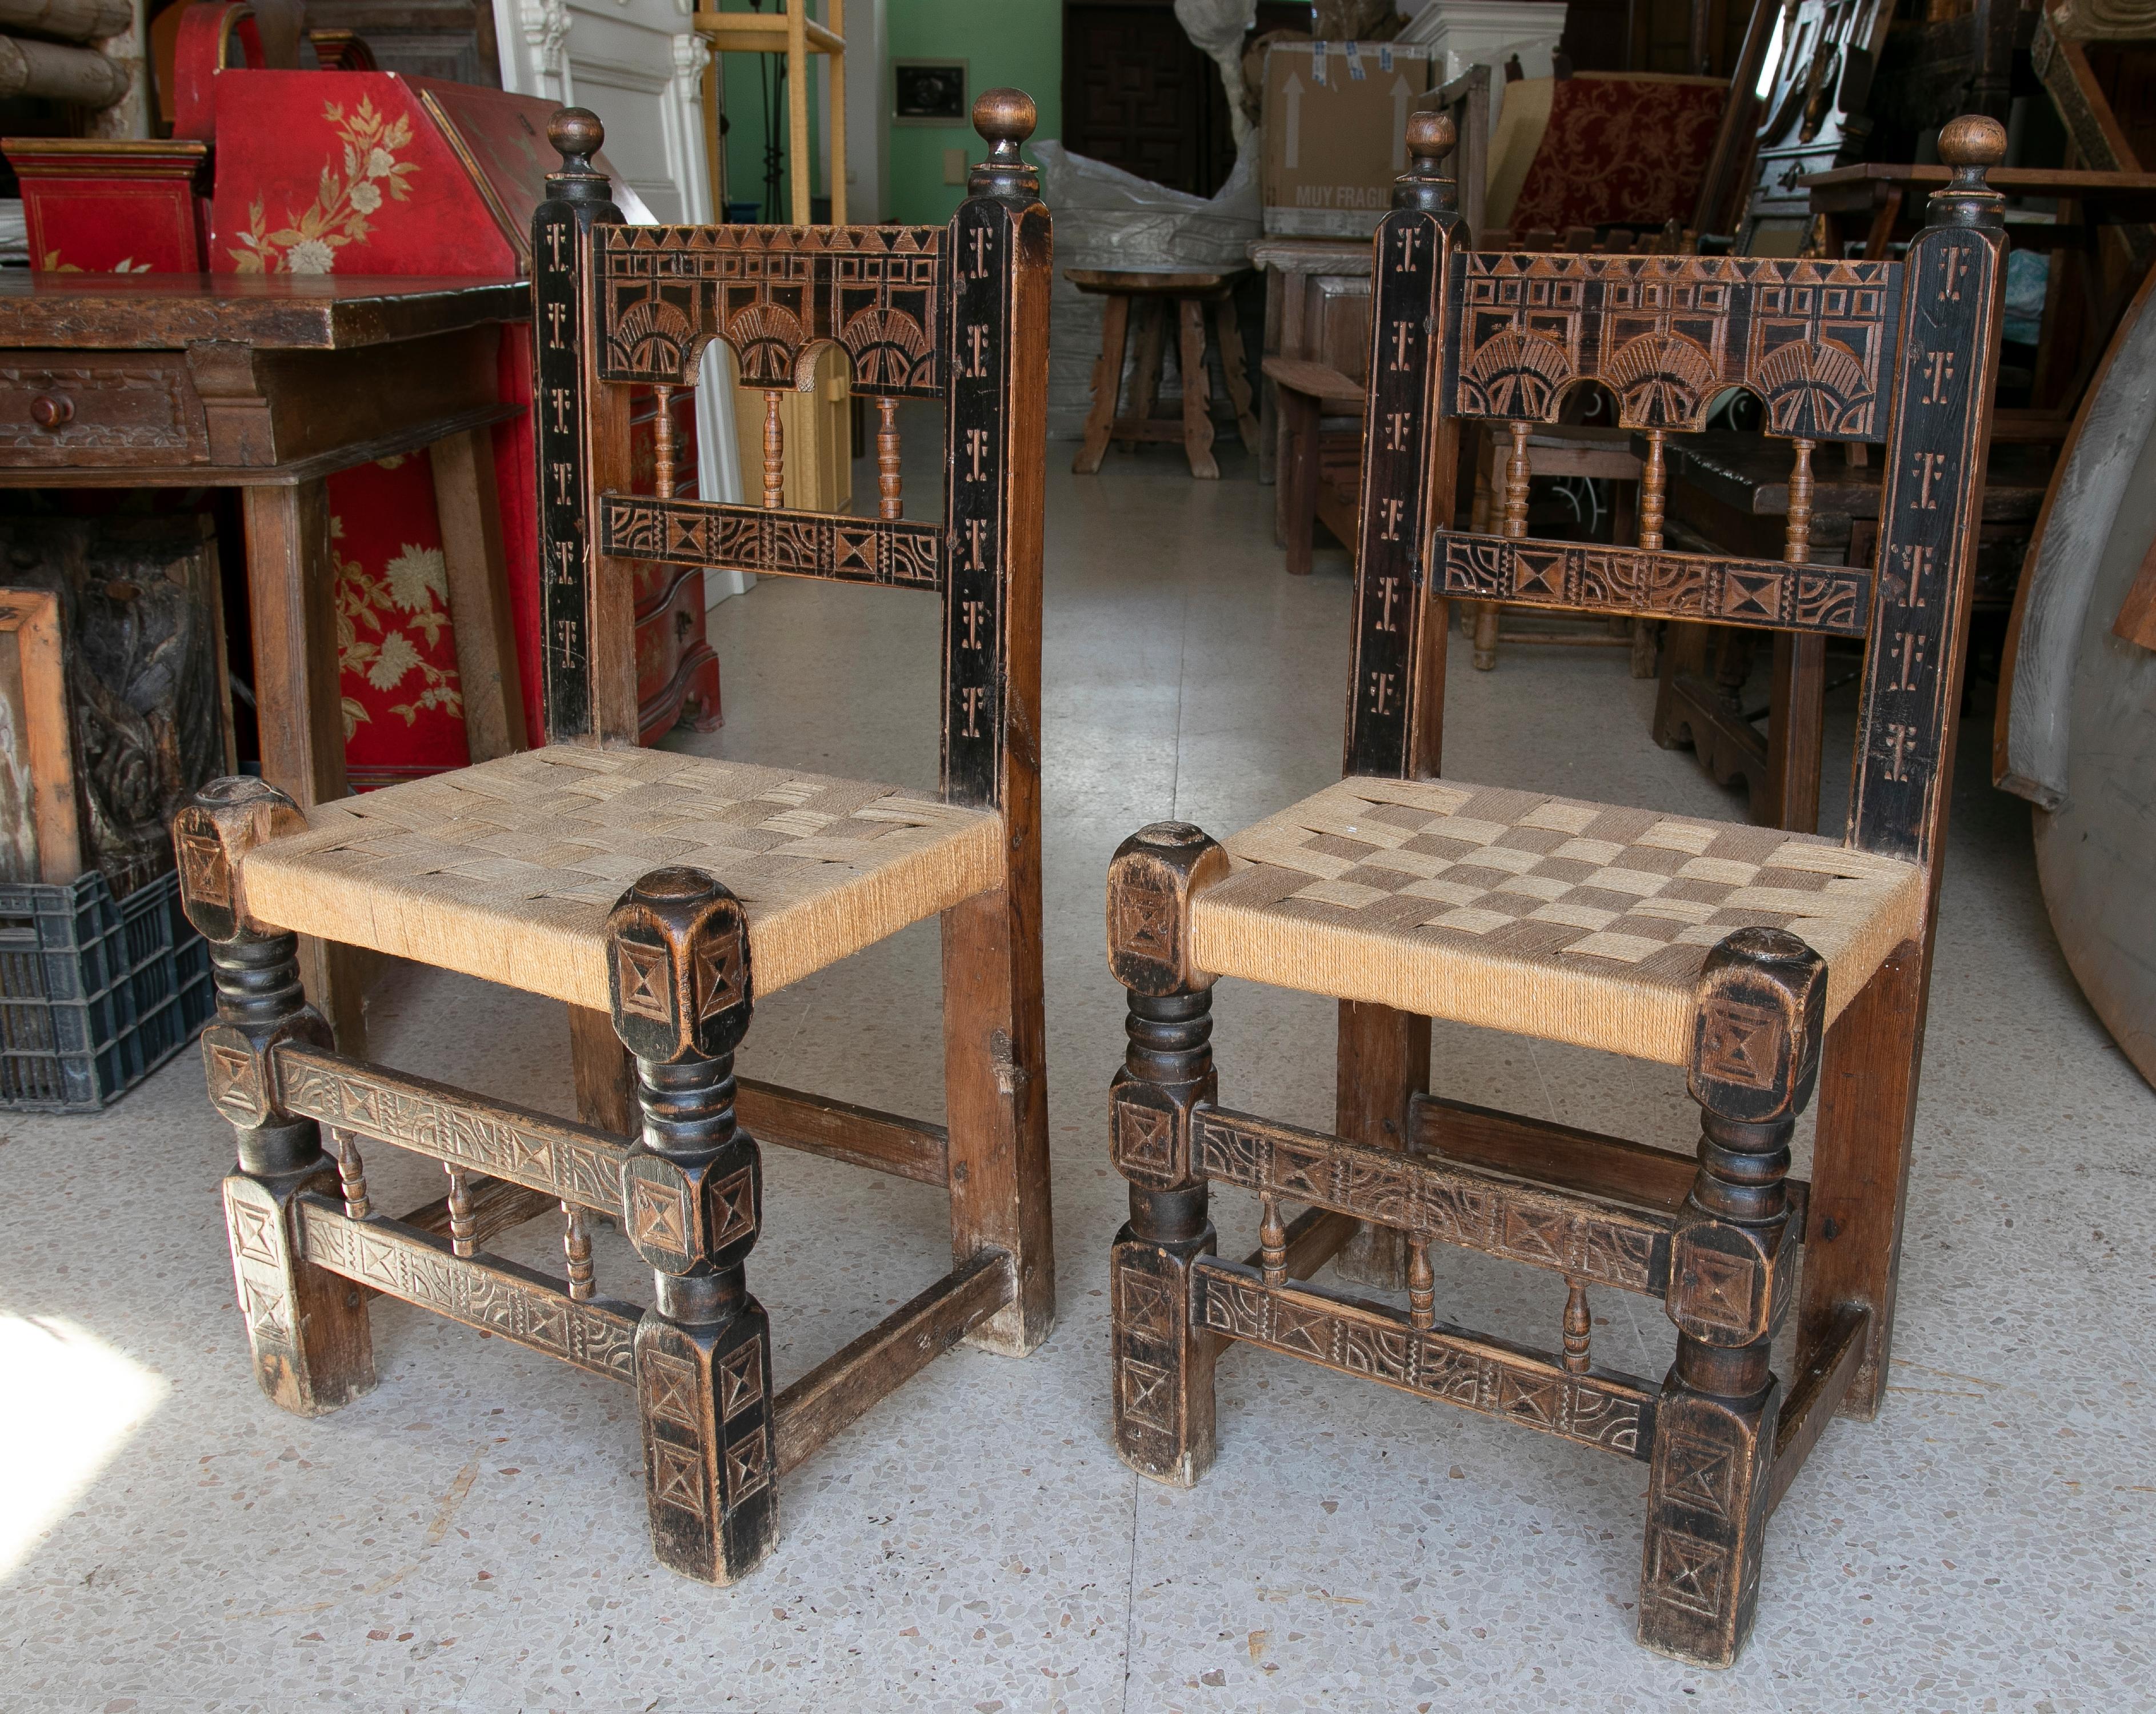 Pair of 1920s Spanish hand carved painted wooden chairs w/ woven bulrush seats.